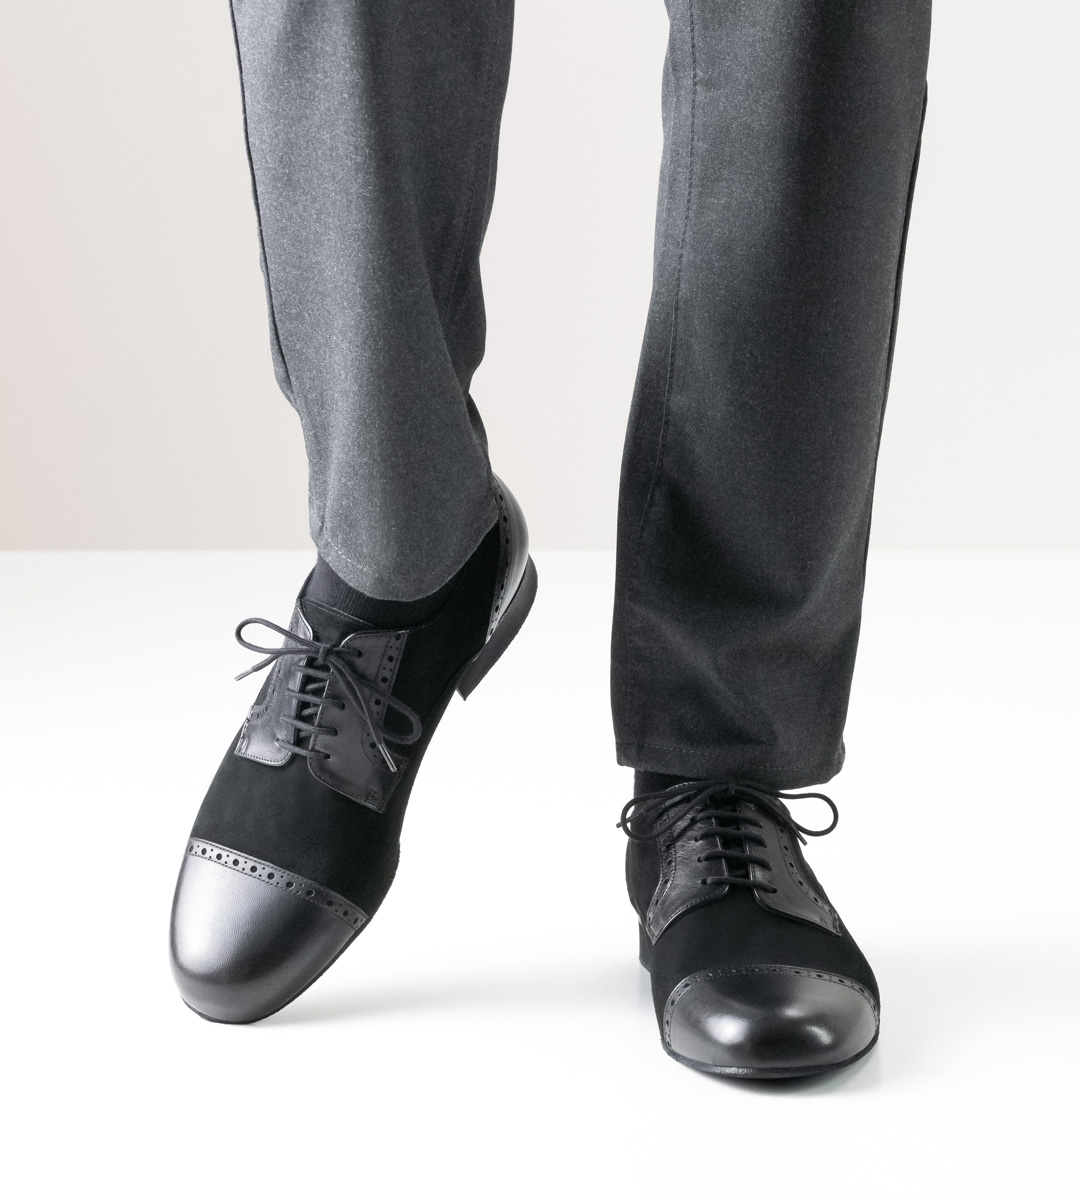 Men's dance shoe in combination of nappa and velour in combination with black jeans